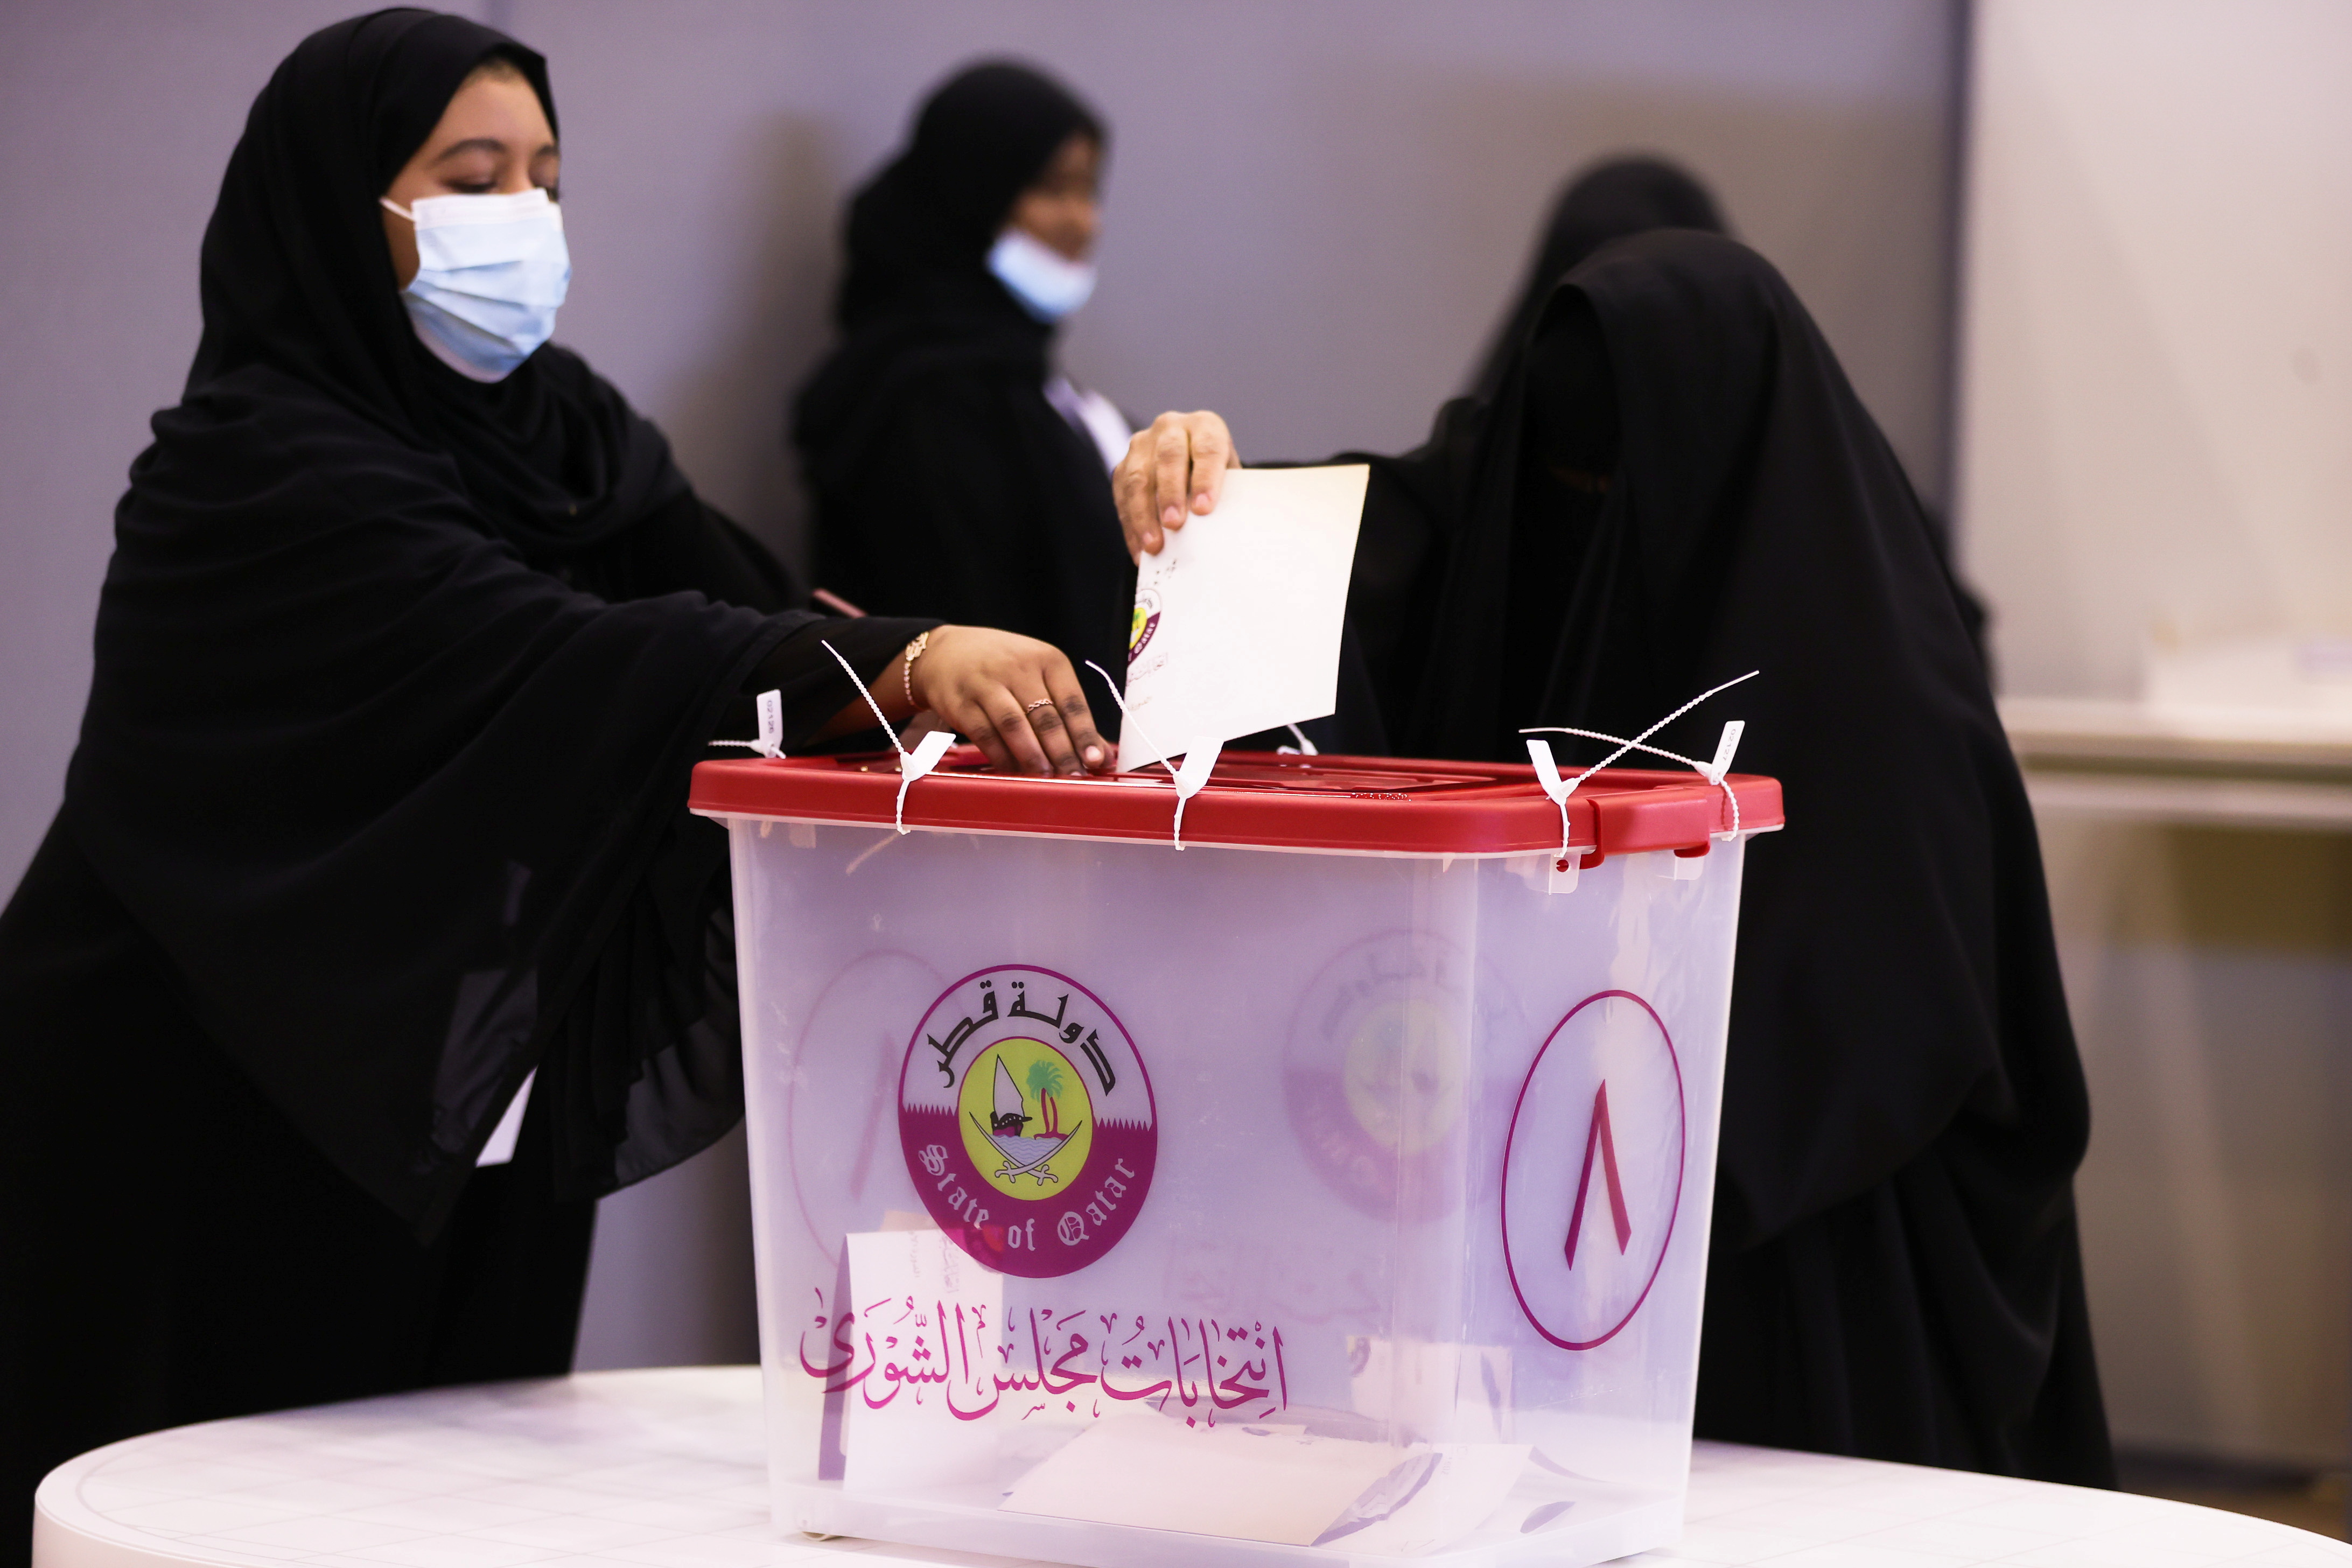 Voter casts their ballot in the Gulf Arab state's first legislative elections for two-thirds of the advisory Shura Council, in Doha, Qatar October 2, 2021. REUTERS/Ibraheem Al Omari